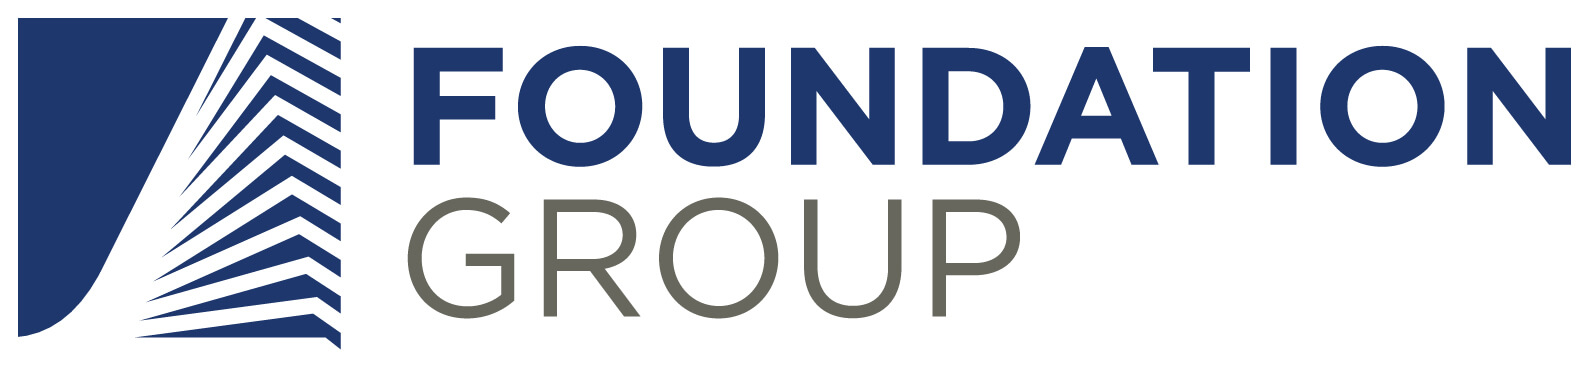 The Foundation Group Named Top Brokerage Firm